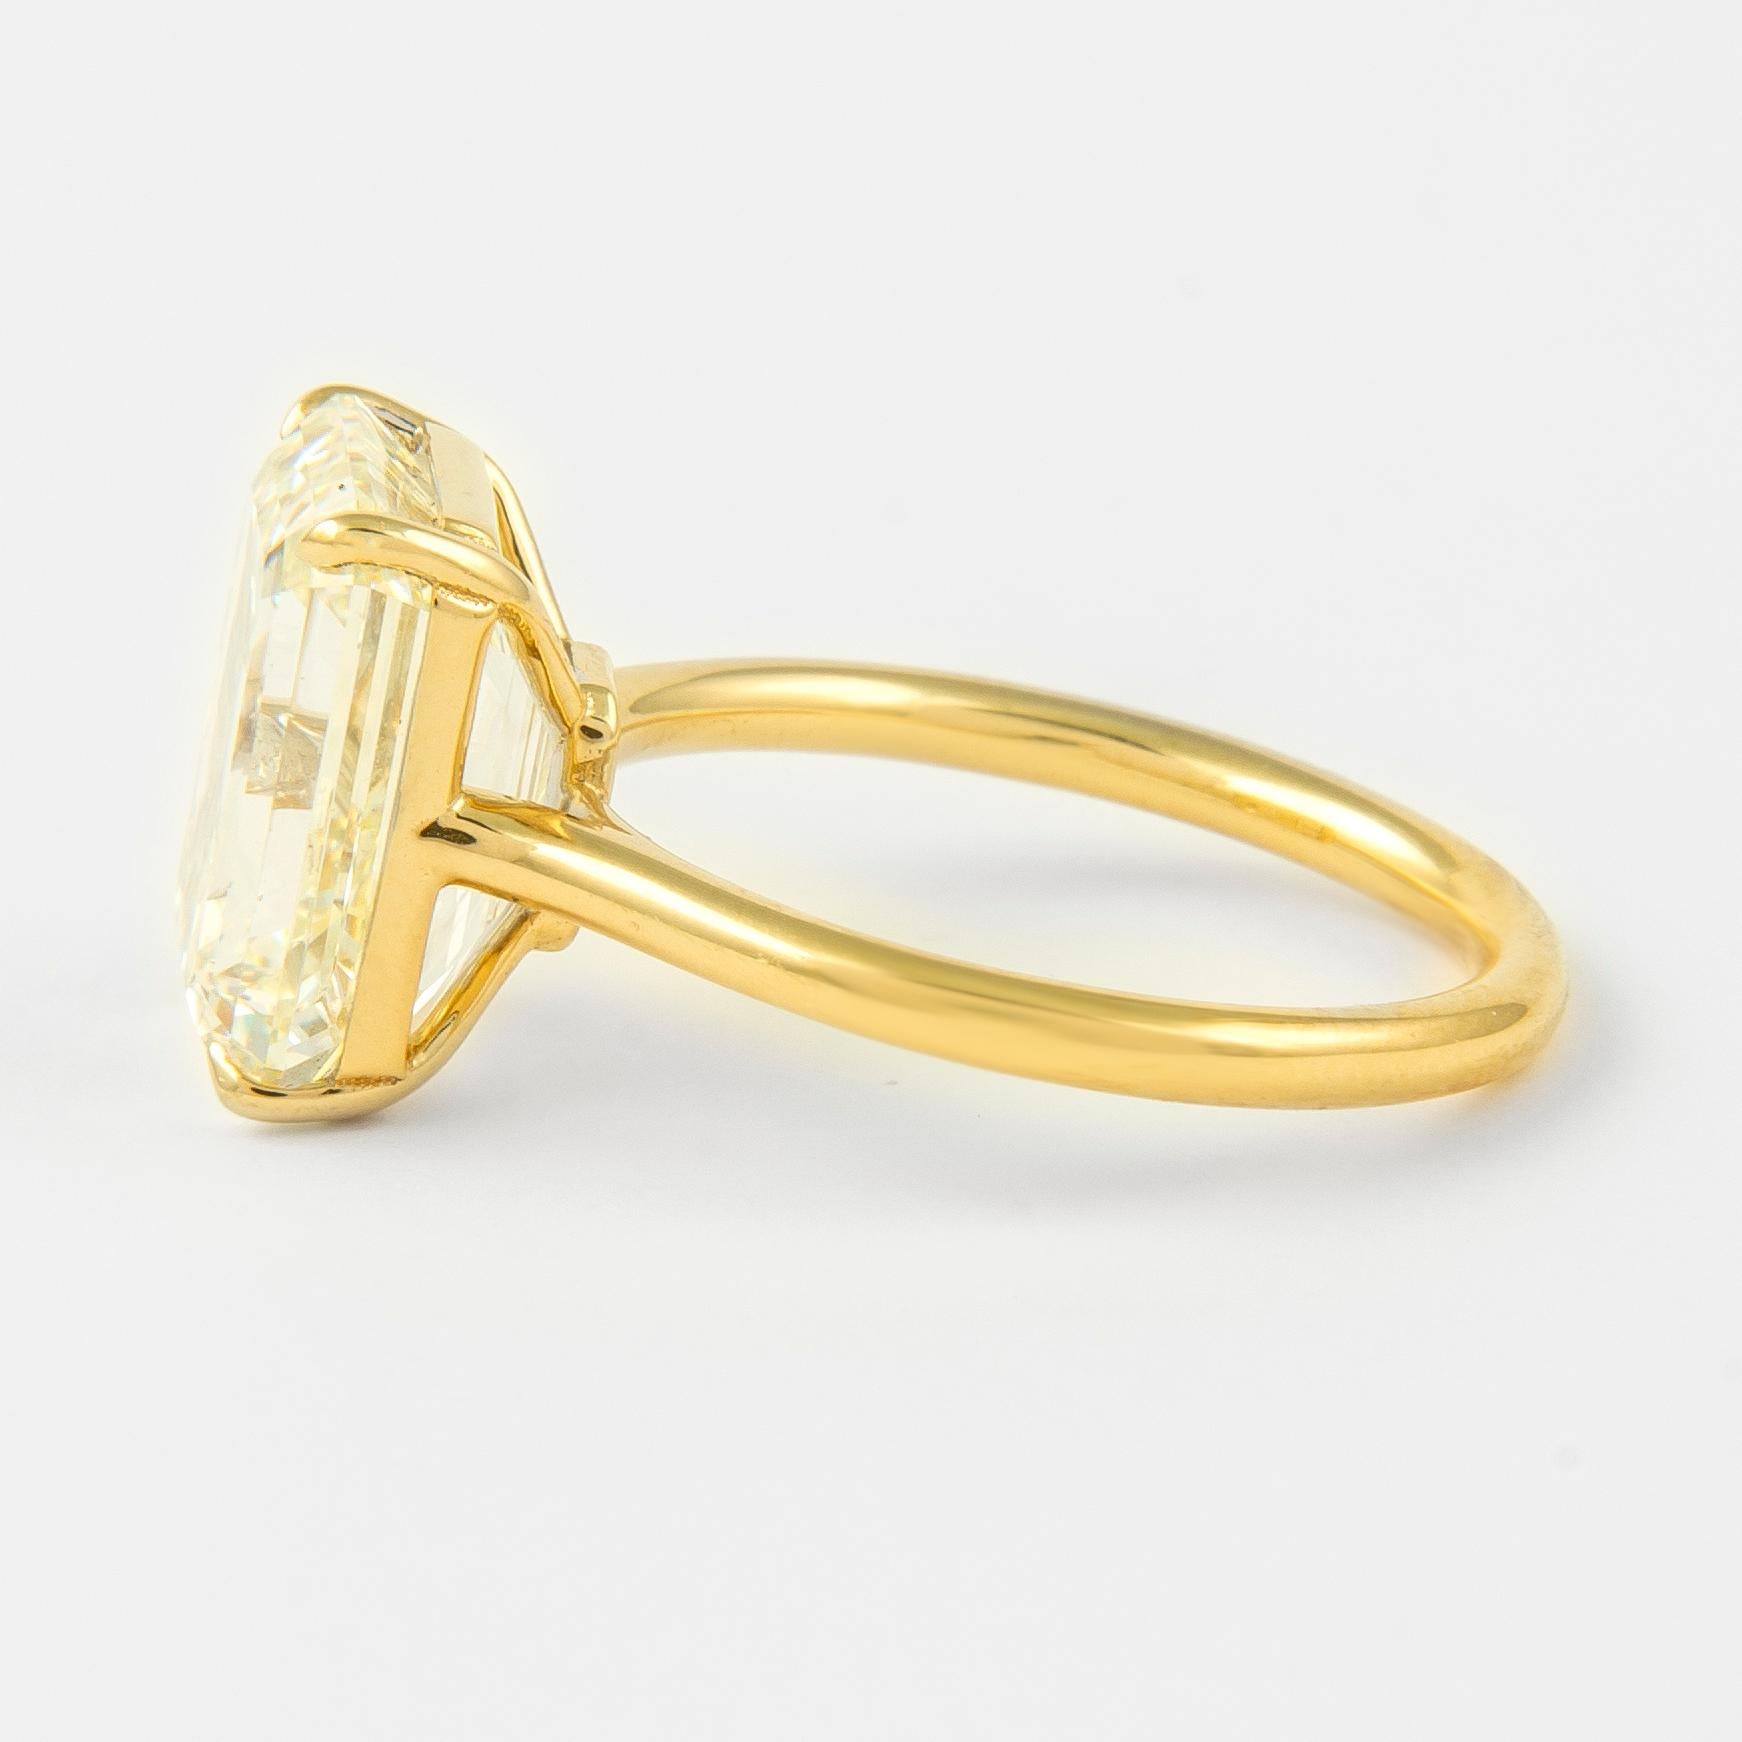 Alexander HRD 6.02 Carat Emerald Cut Diamond Solitaire Ring 18k Yellow Gold In New Condition For Sale In BEVERLY HILLS, CA